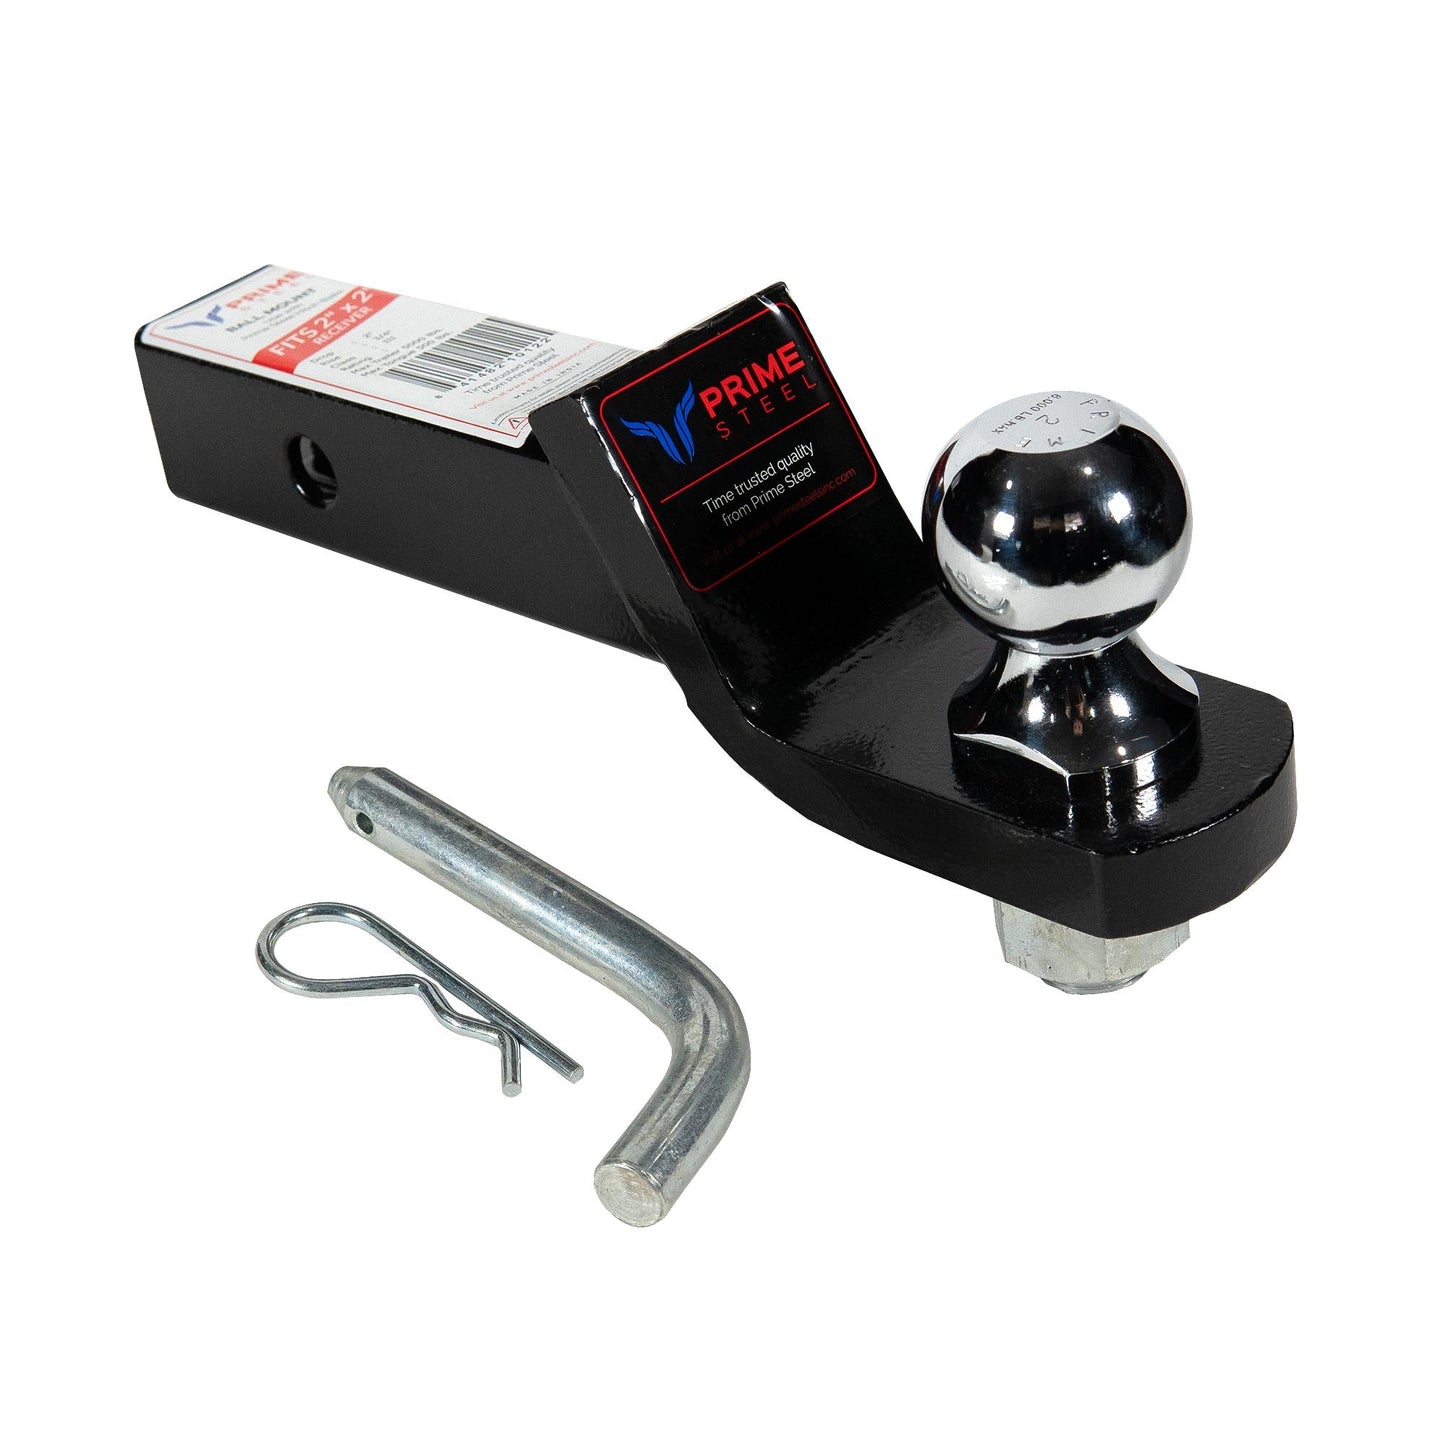 Ready to Tow Trailer 2 5/16" Receiver Ball and Trailer Ball Mount with Pin & Clip (6K Capacity) PS-18122